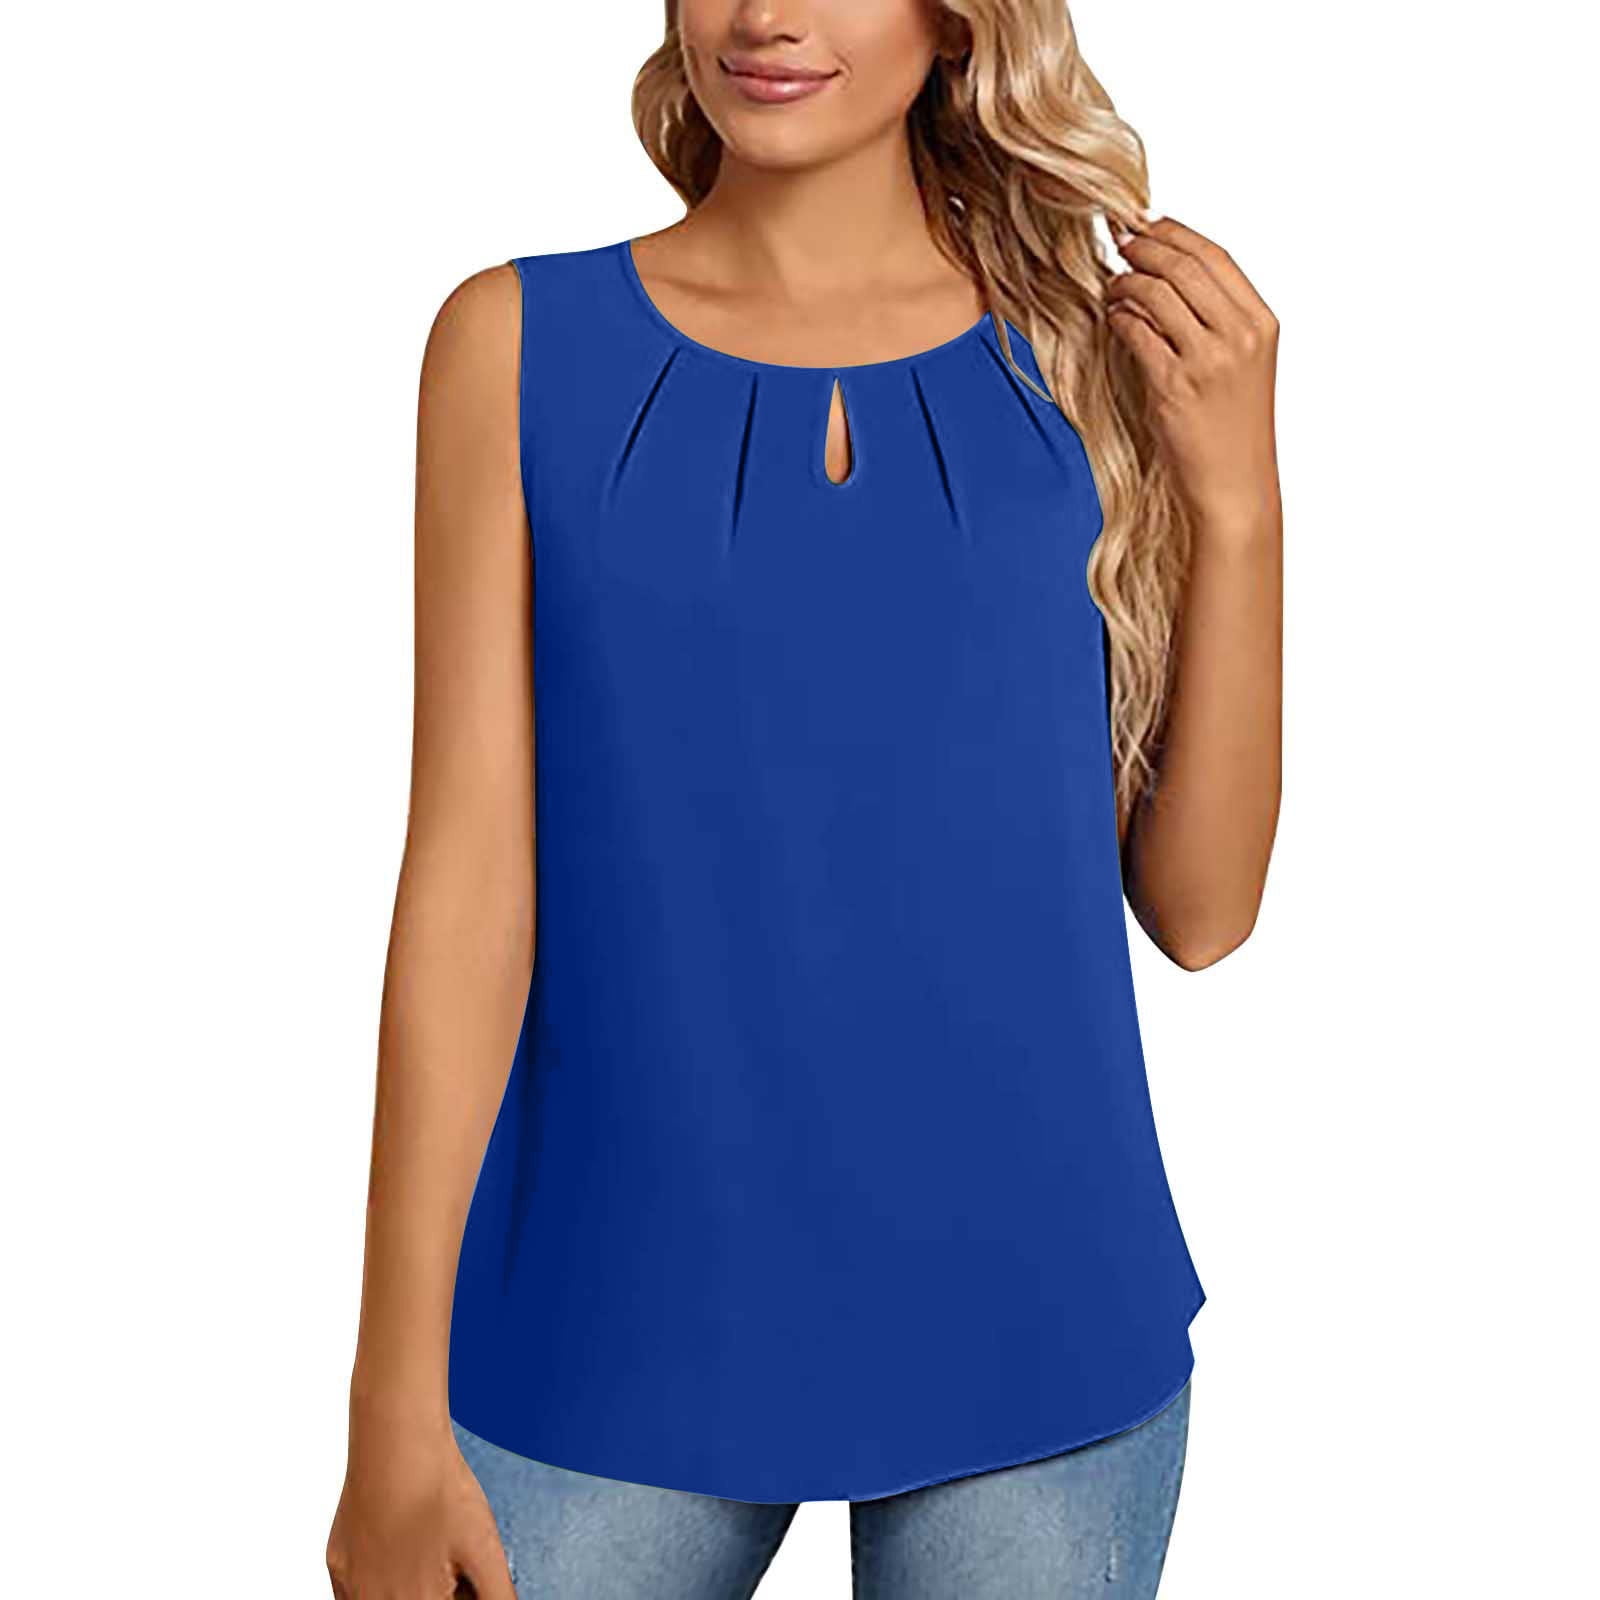 New Womens Royal Blue Solid Slouchy Tank Top Tops Flowy Loose Shirt S M L XL